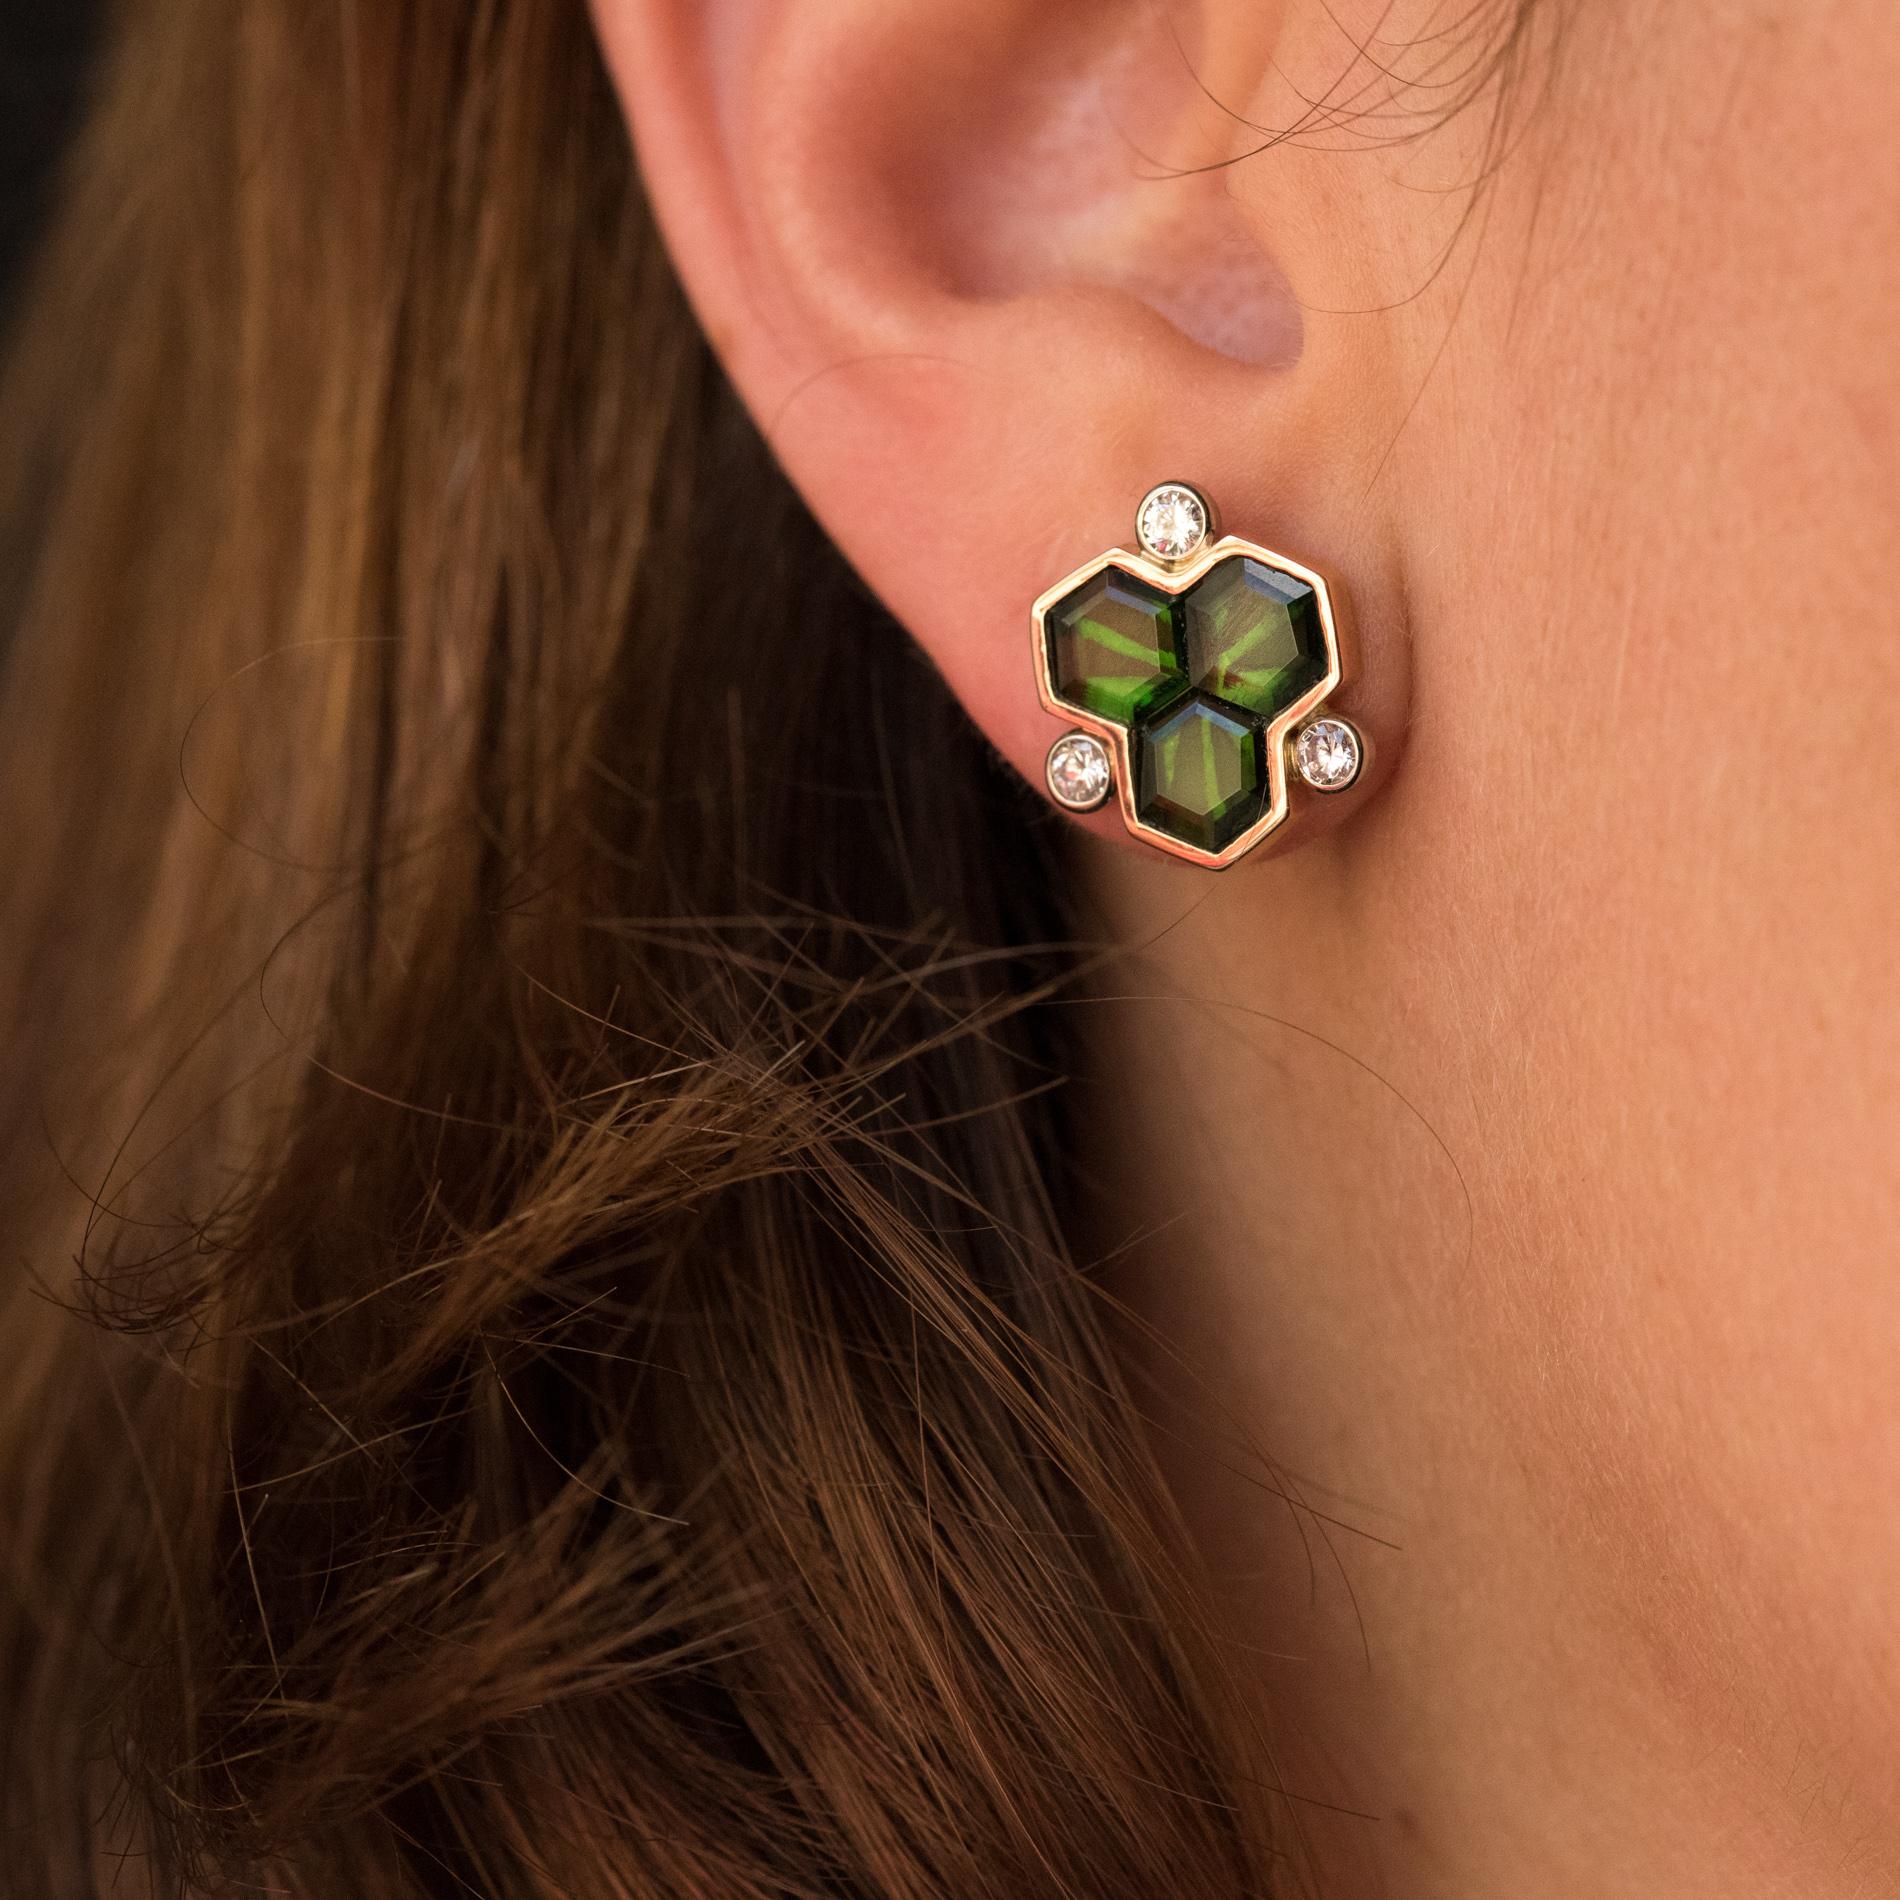 Baume Creation - Unique piece.
Pair of ear studs in 18 karats yellow gold.
Each ear stud is adorned, in closed setting, with three ultra flat hexagonal green tourmaline. The entourage is punctuated with 3 brilliant- cut diamonds. The attachment